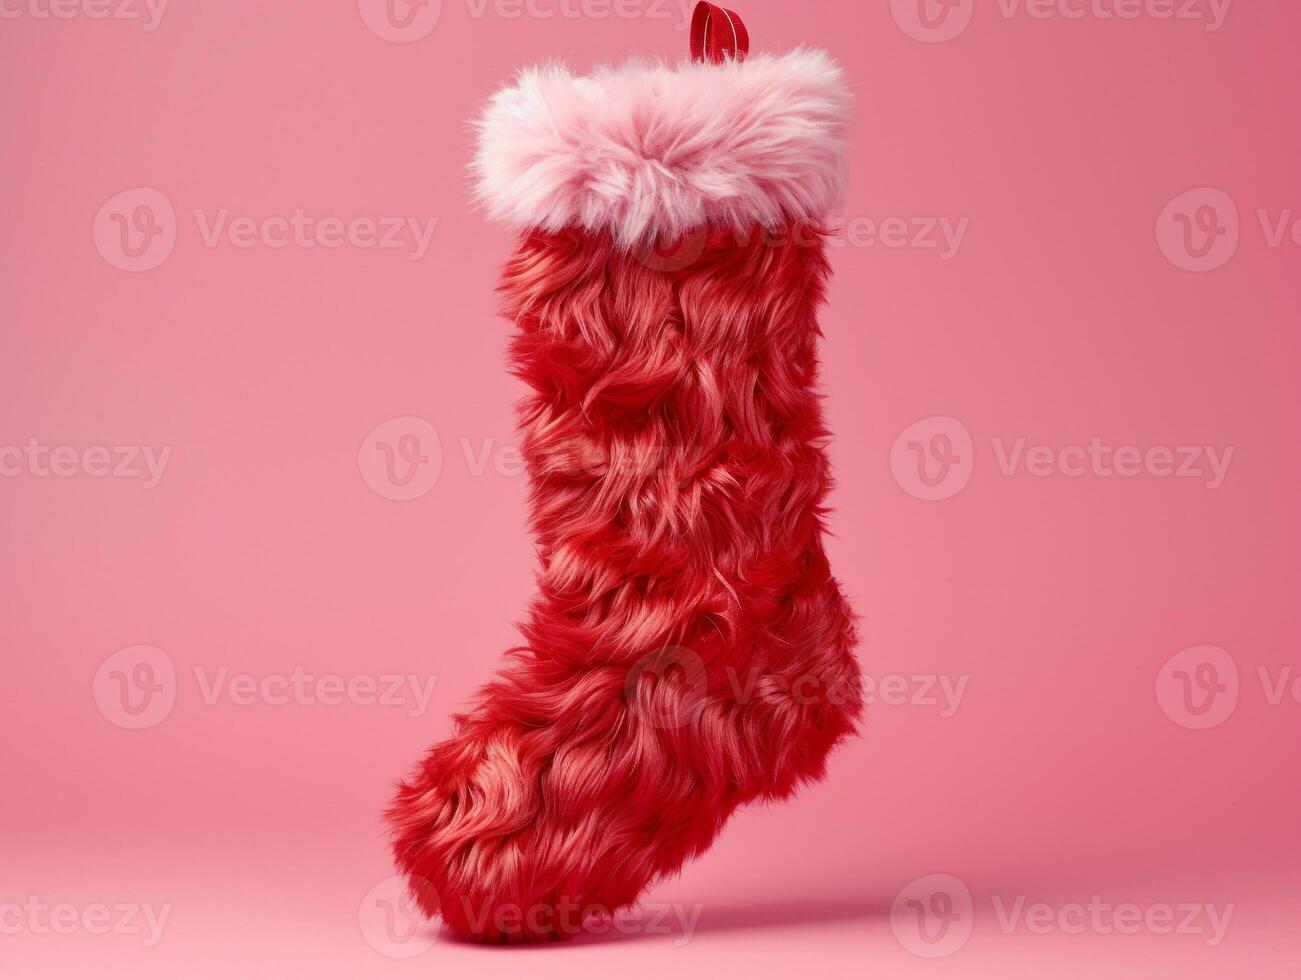 A red christmas stocking is shown against a pink background, christmas image, 3d illustration images photo